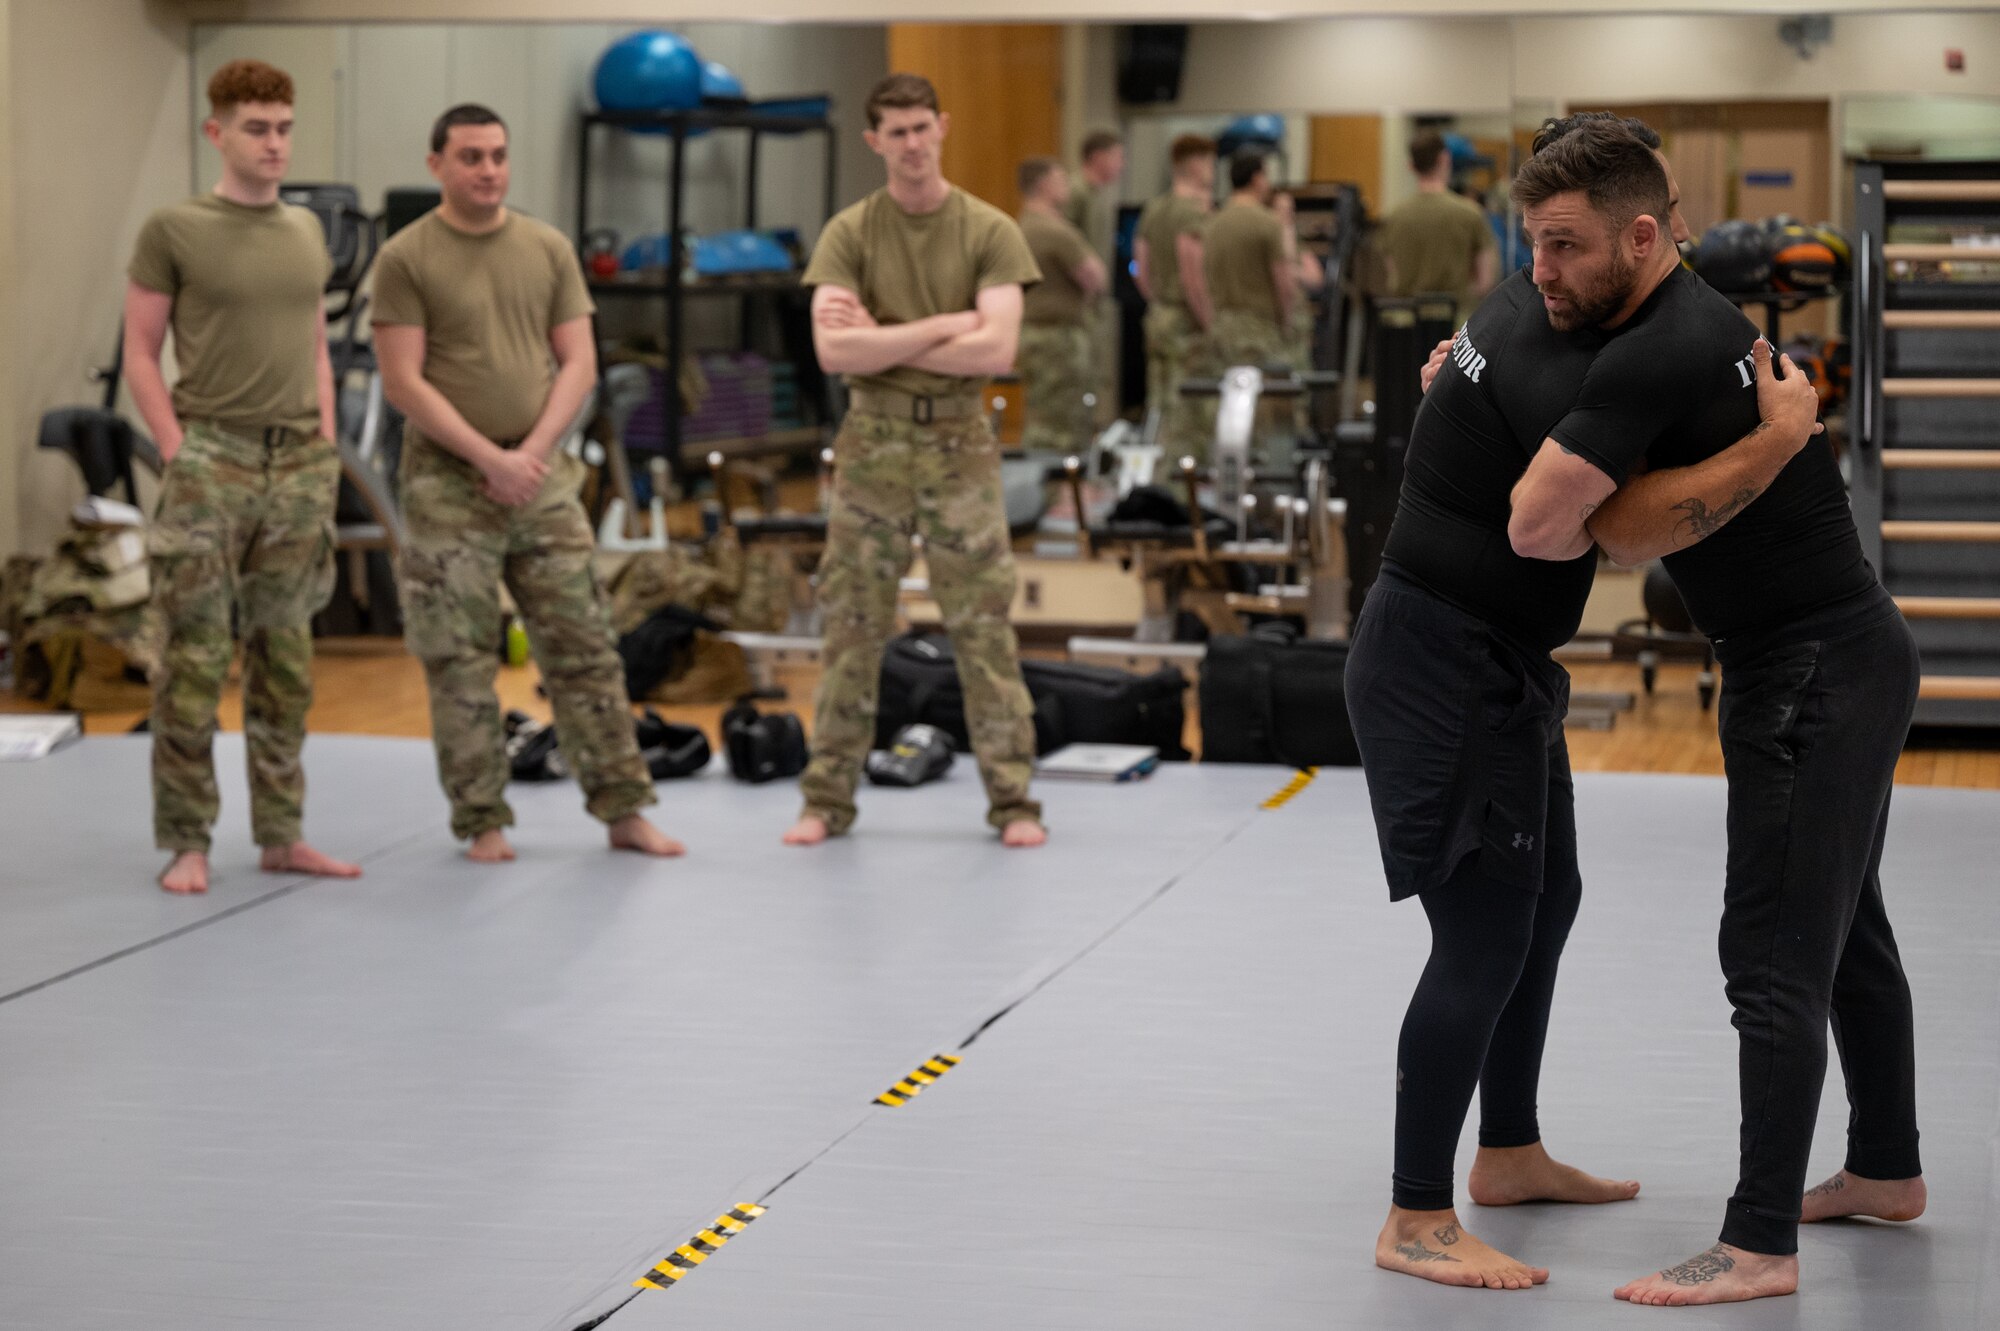 U.S. Air Force combatives instructors from the 5th Combat Communications Support Squadron teach steps for handling an opponent during a combatives instructor certification course at Osan Air Base, Republic of Korea, Feb. 23, 2024. Airmen that participated in the course become multi-capable as they are now certified to instruct Air Force personnel in combative tactics. The 621st Air Control Squadron and 607th Air Operations Center intend to utilize the new certifications to tailor a combatives program to their operational needs and enhance their ability to support the 51st Fighter Wing’s combat lethality. (U.S. Air Force photo by Airman 1st Class Chase Verzaal)